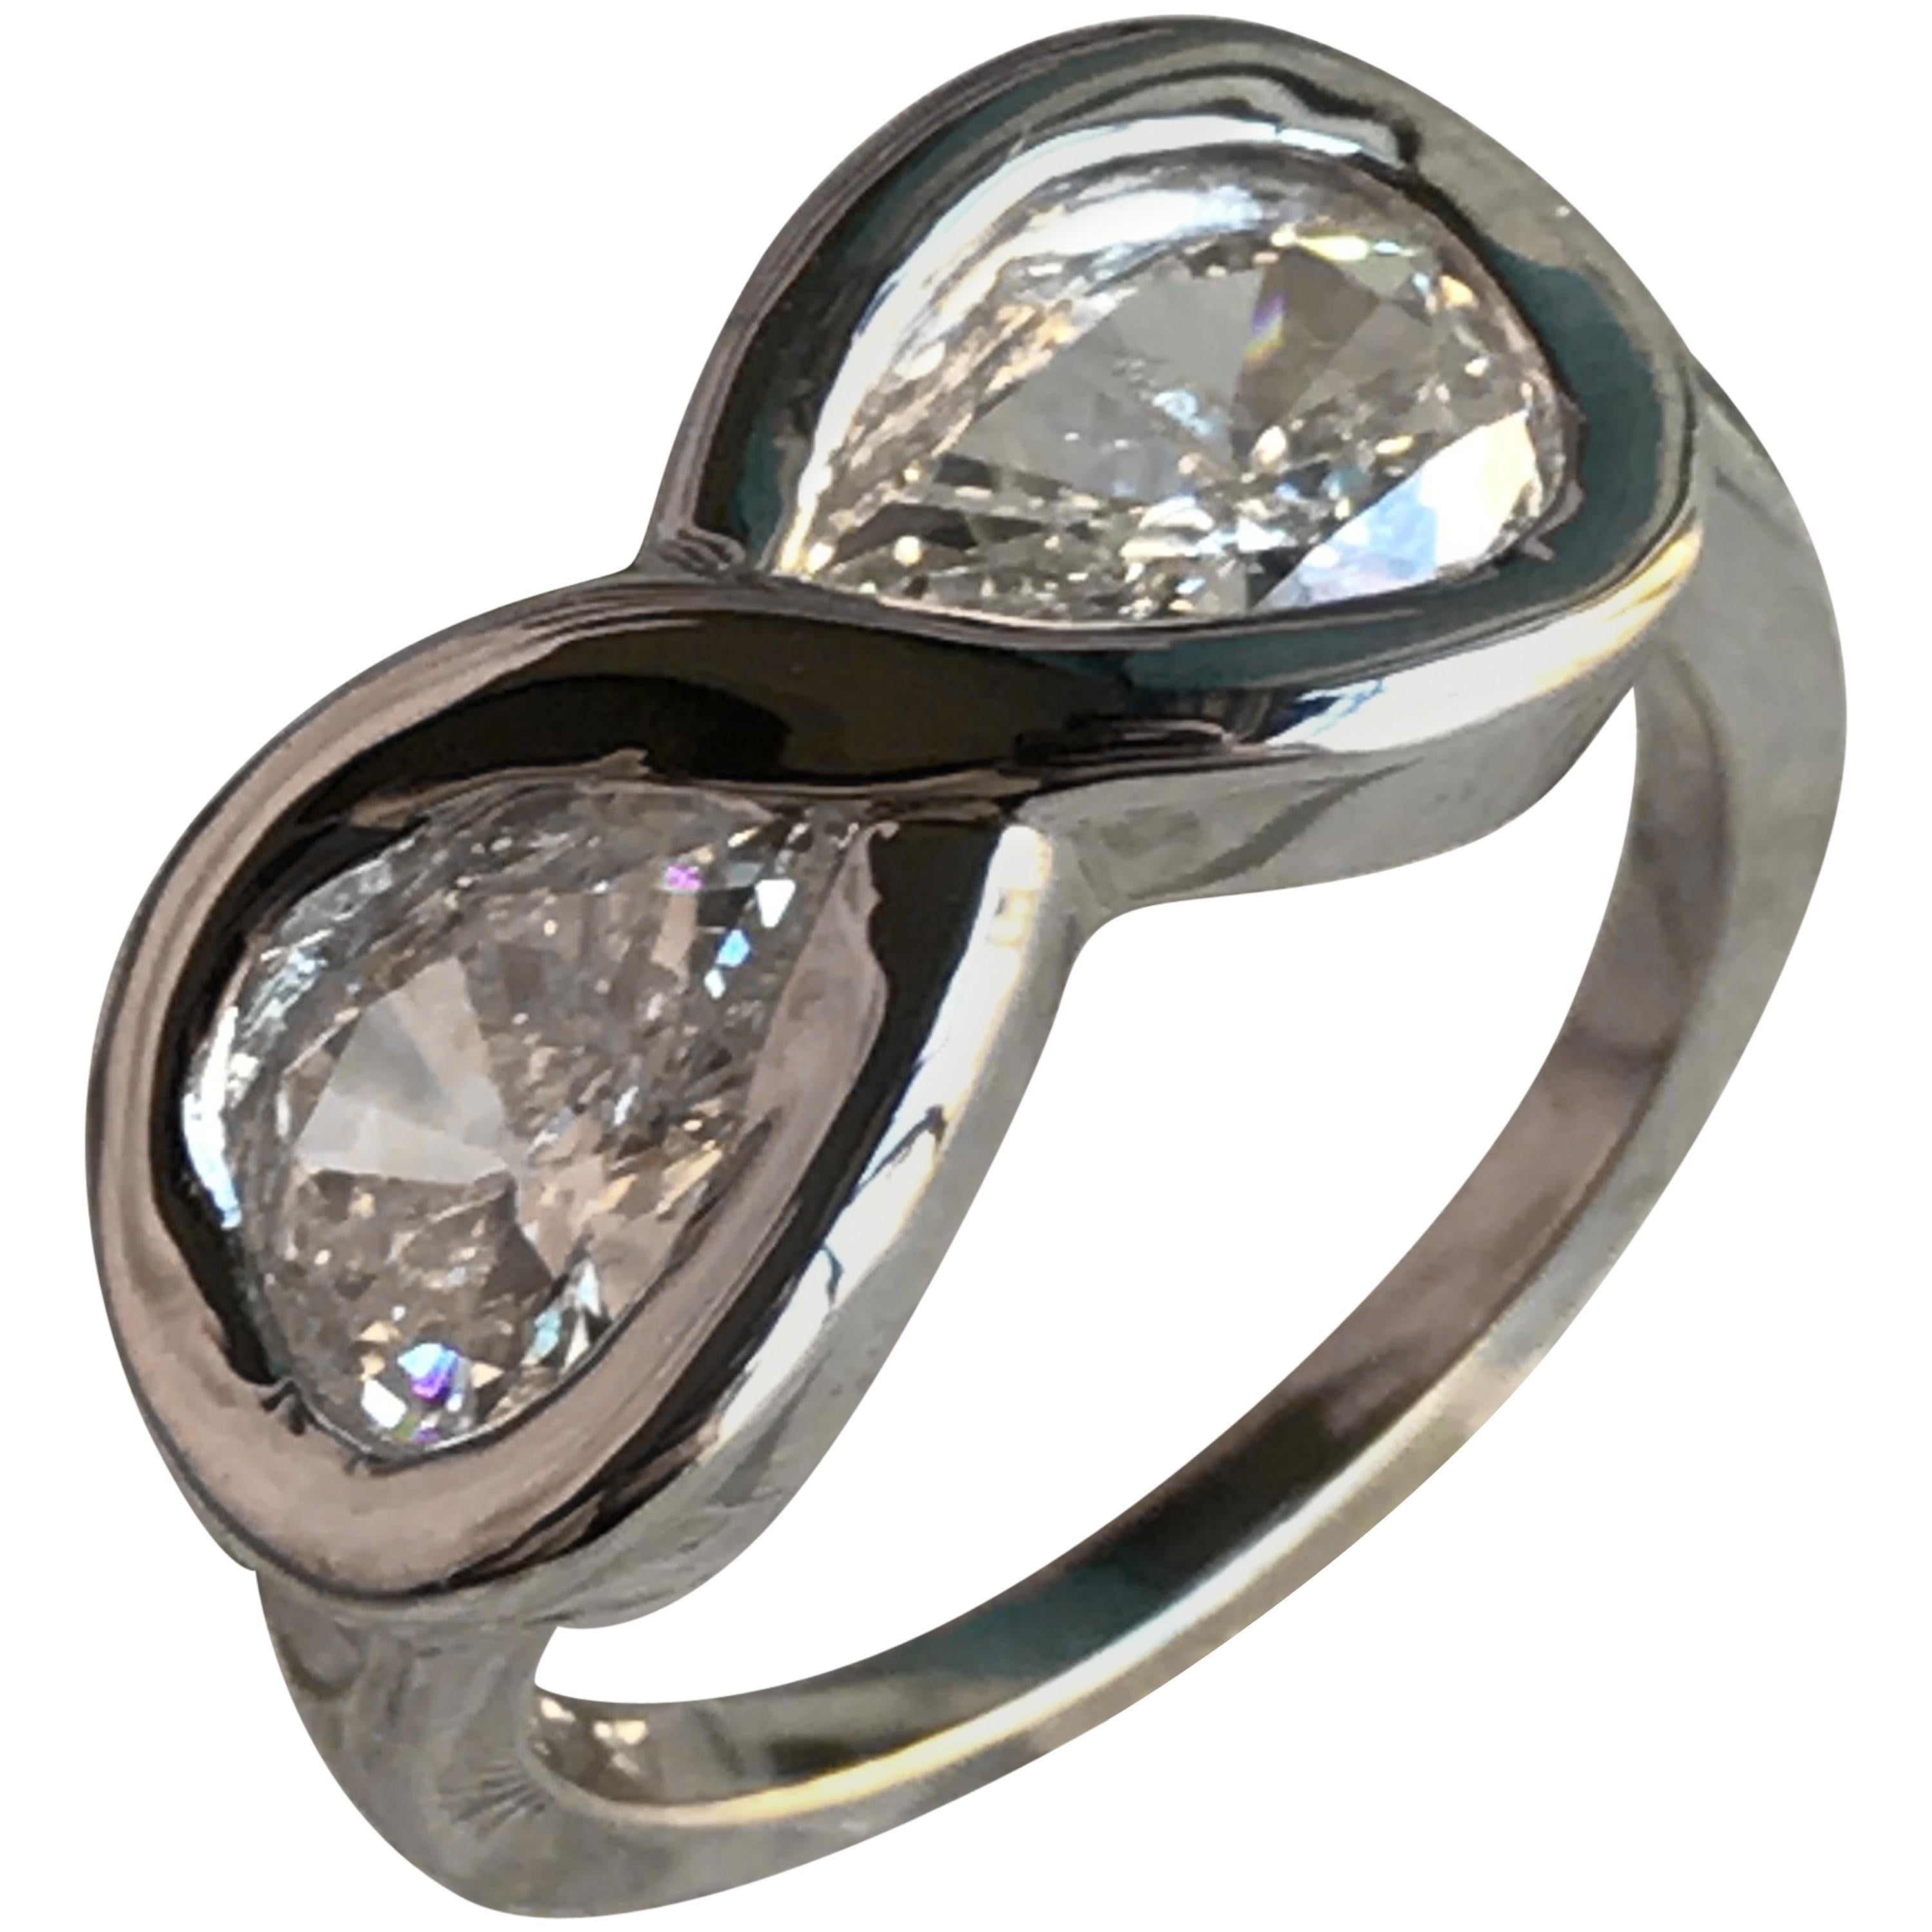 1.5 Carat Approximate Pear Shape Diamond Infinity Ring, Ben Dannie For Sale